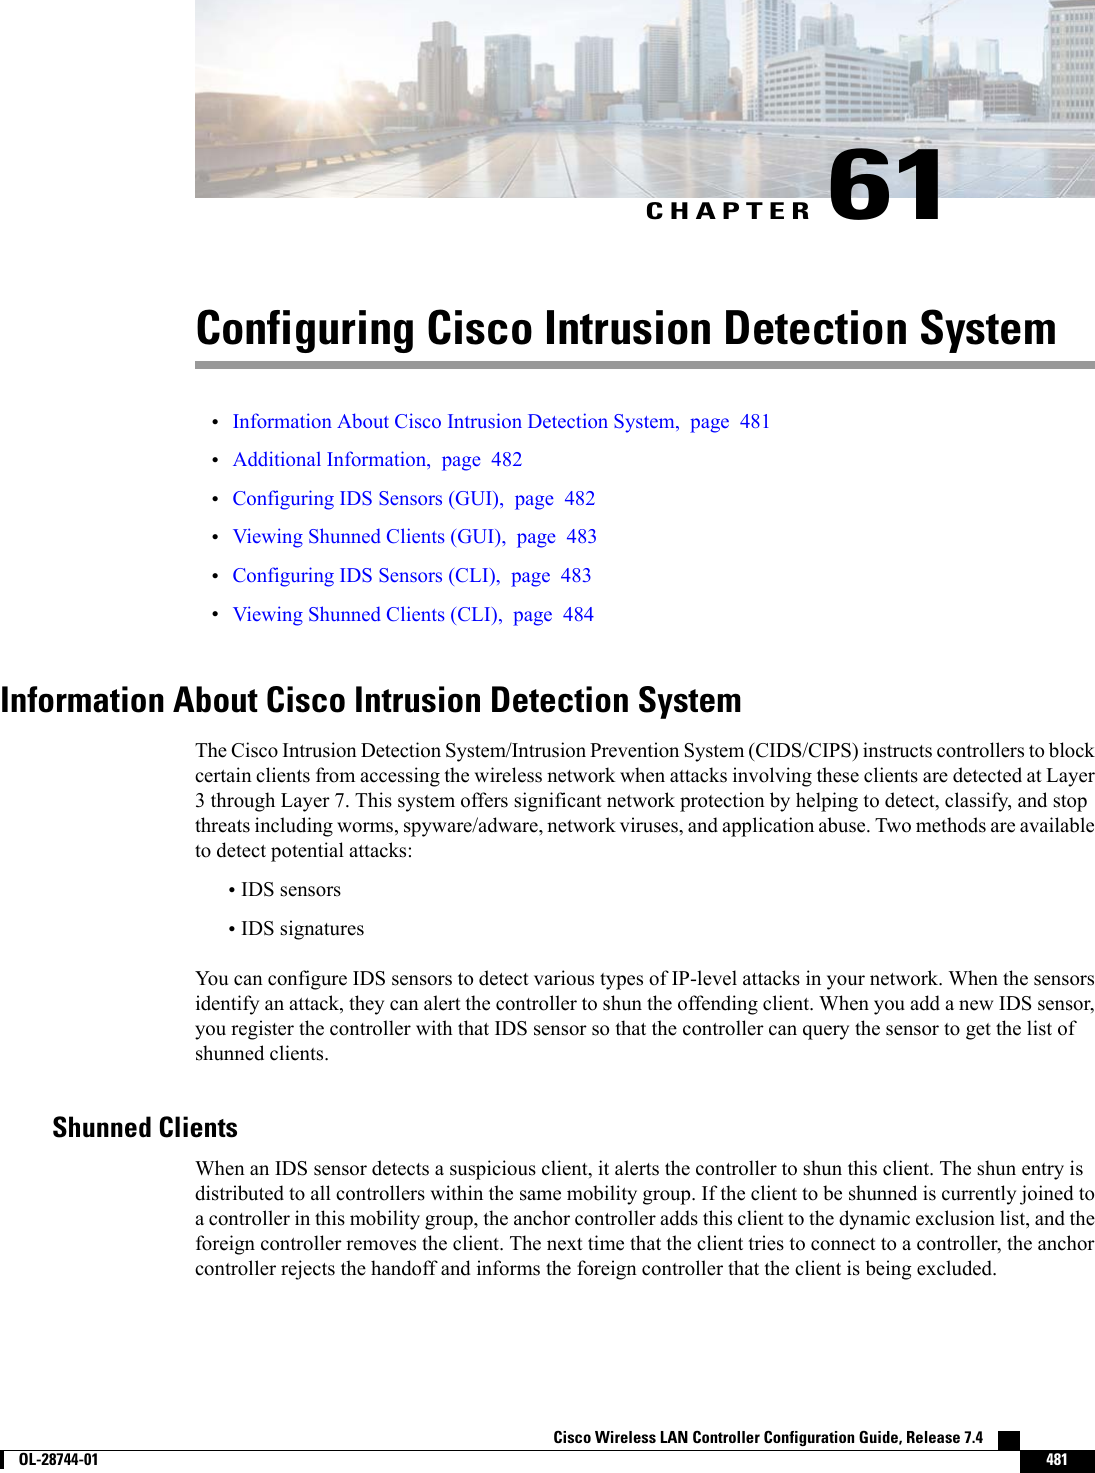 CHAPTER 61Configuring Cisco Intrusion Detection System•Information About Cisco Intrusion Detection System, page 481•Additional Information, page 482•Configuring IDS Sensors (GUI), page 482•Viewing Shunned Clients (GUI), page 483•Configuring IDS Sensors (CLI), page 483•Viewing Shunned Clients (CLI), page 484Information About Cisco Intrusion Detection SystemThe Cisco Intrusion Detection System/Intrusion Prevention System (CIDS/CIPS) instructs controllers to blockcertain clients from accessing the wireless network when attacks involving these clients are detected at Layer3 through Layer 7. This system offers significant network protection by helping to detect, classify, and stopthreats including worms, spyware/adware, network viruses, and application abuse. Two methods are availableto detect potential attacks:•IDS sensors•IDS signaturesYou can configure IDS sensors to detect various types of IP-level attacks in your network. When the sensorsidentify an attack, they can alert the controller to shun the offending client. When you add a new IDS sensor,you register the controller with that IDS sensor so that the controller can query the sensor to get the list ofshunned clients.Shunned ClientsWhen an IDS sensor detects a suspicious client, it alerts the controller to shun this client. The shun entry isdistributed to all controllers within the same mobility group. If the client to be shunned is currently joined toa controller in this mobility group, the anchor controller adds this client to the dynamic exclusion list, and theforeign controller removes the client. The next time that the client tries to connect to a controller, the anchorcontroller rejects the handoff and informs the foreign controller that the client is being excluded.Cisco Wireless LAN Controller Configuration Guide, Release 7.4        OL-28744-01 481